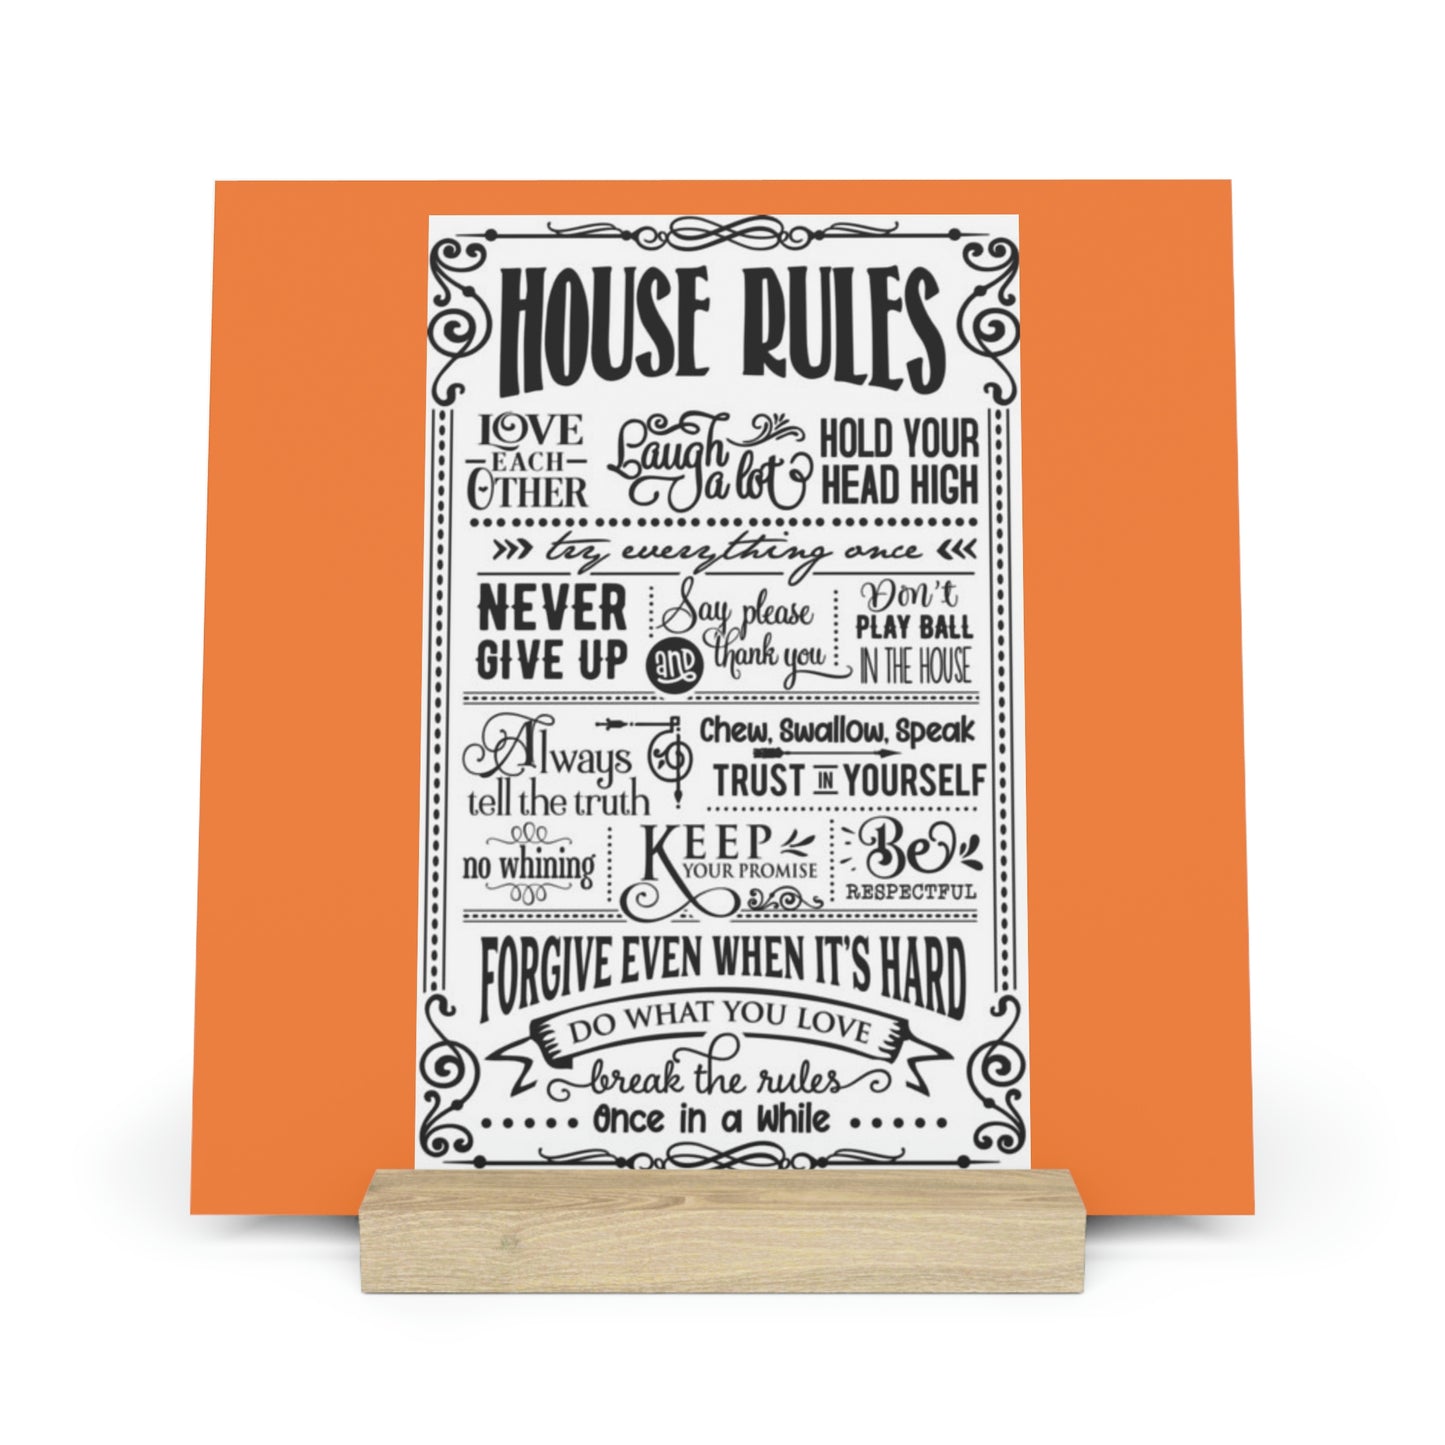 House Rules Gallery Board with Stand